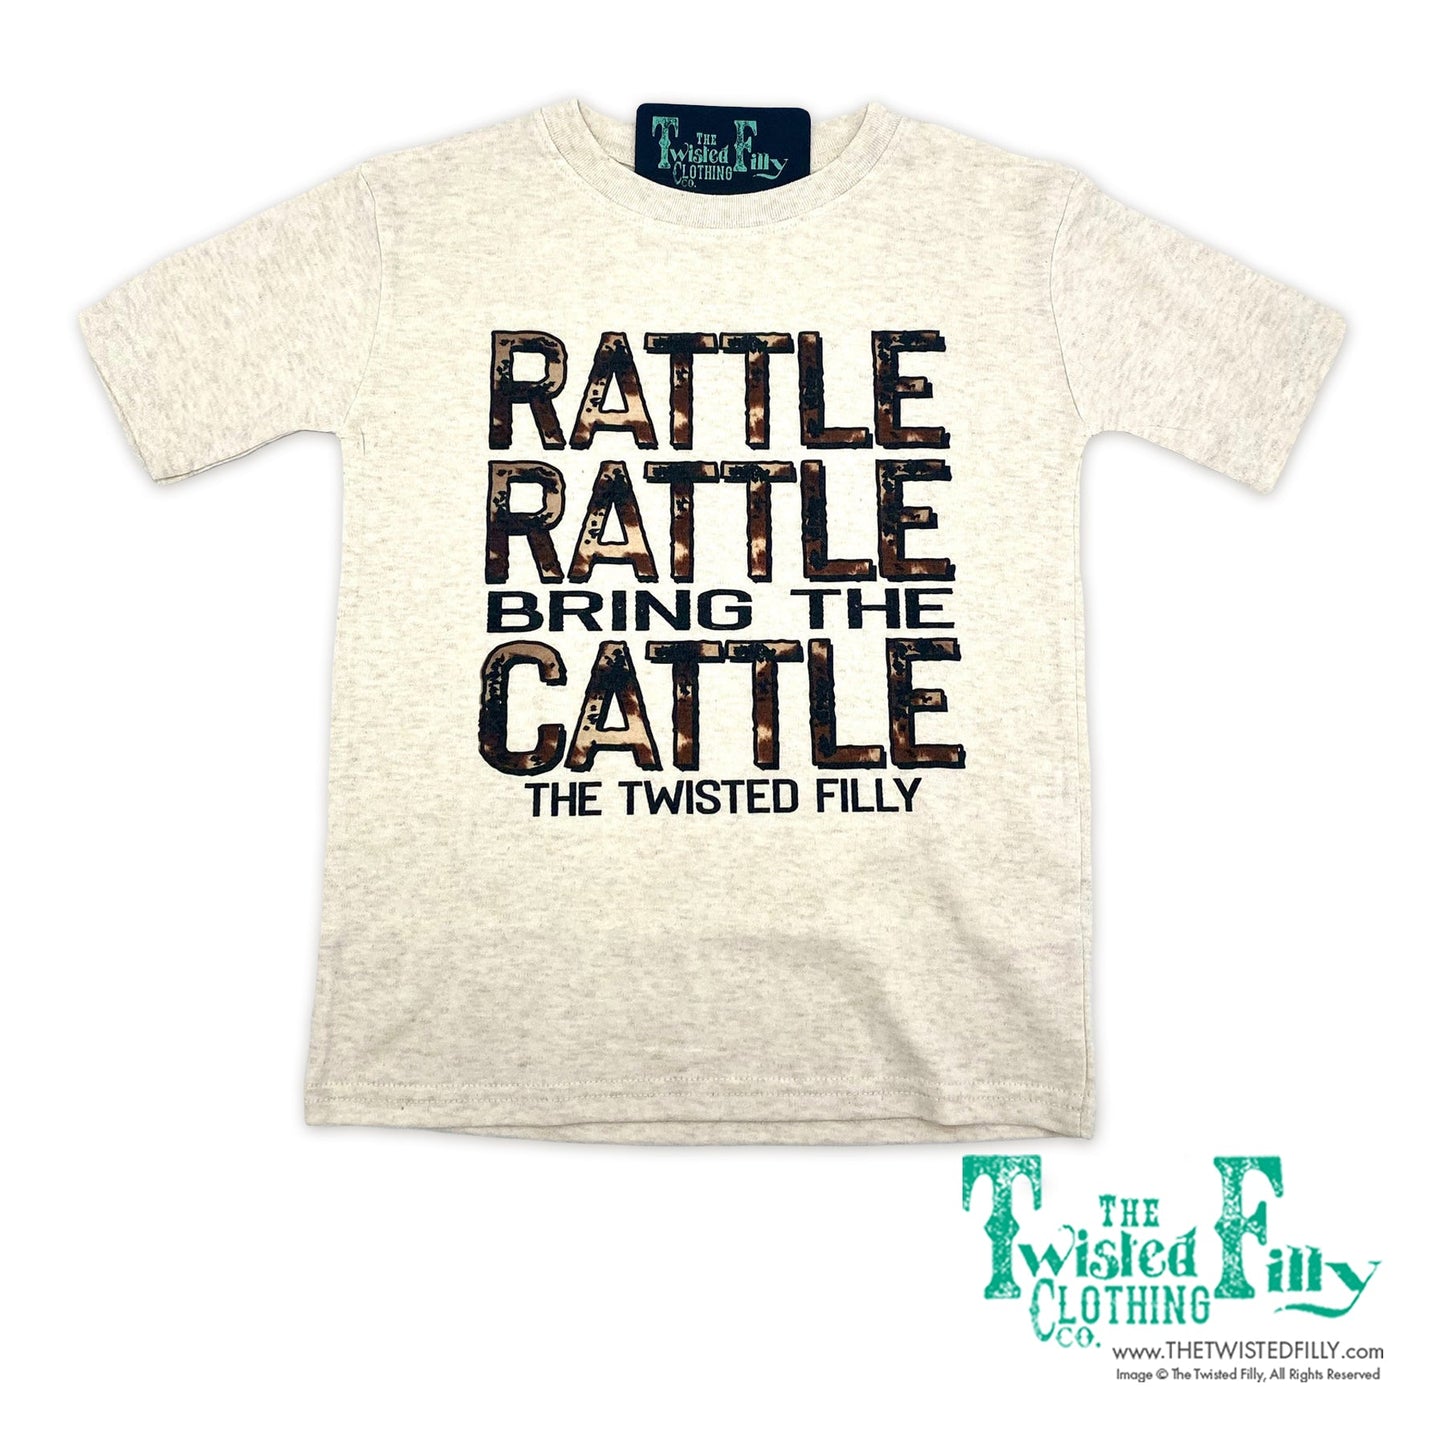 Rattle Rattle Bring the Cattle - S/S Adult Tee - Oatmeal